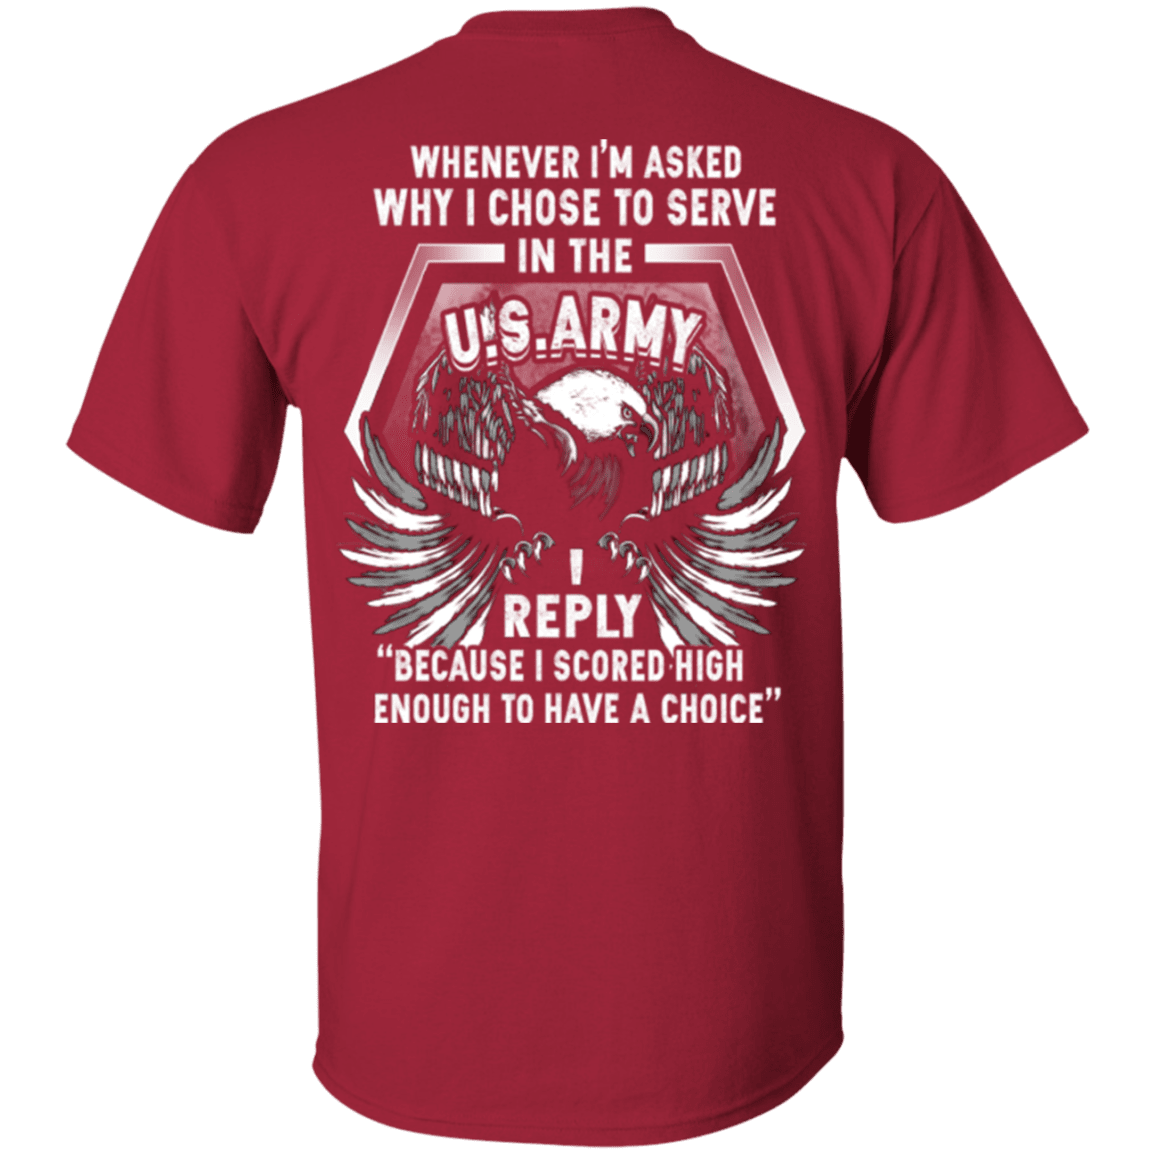 I Chose To Serve In The U.S Army T Shirt-TShirt-Army-Veterans Nation